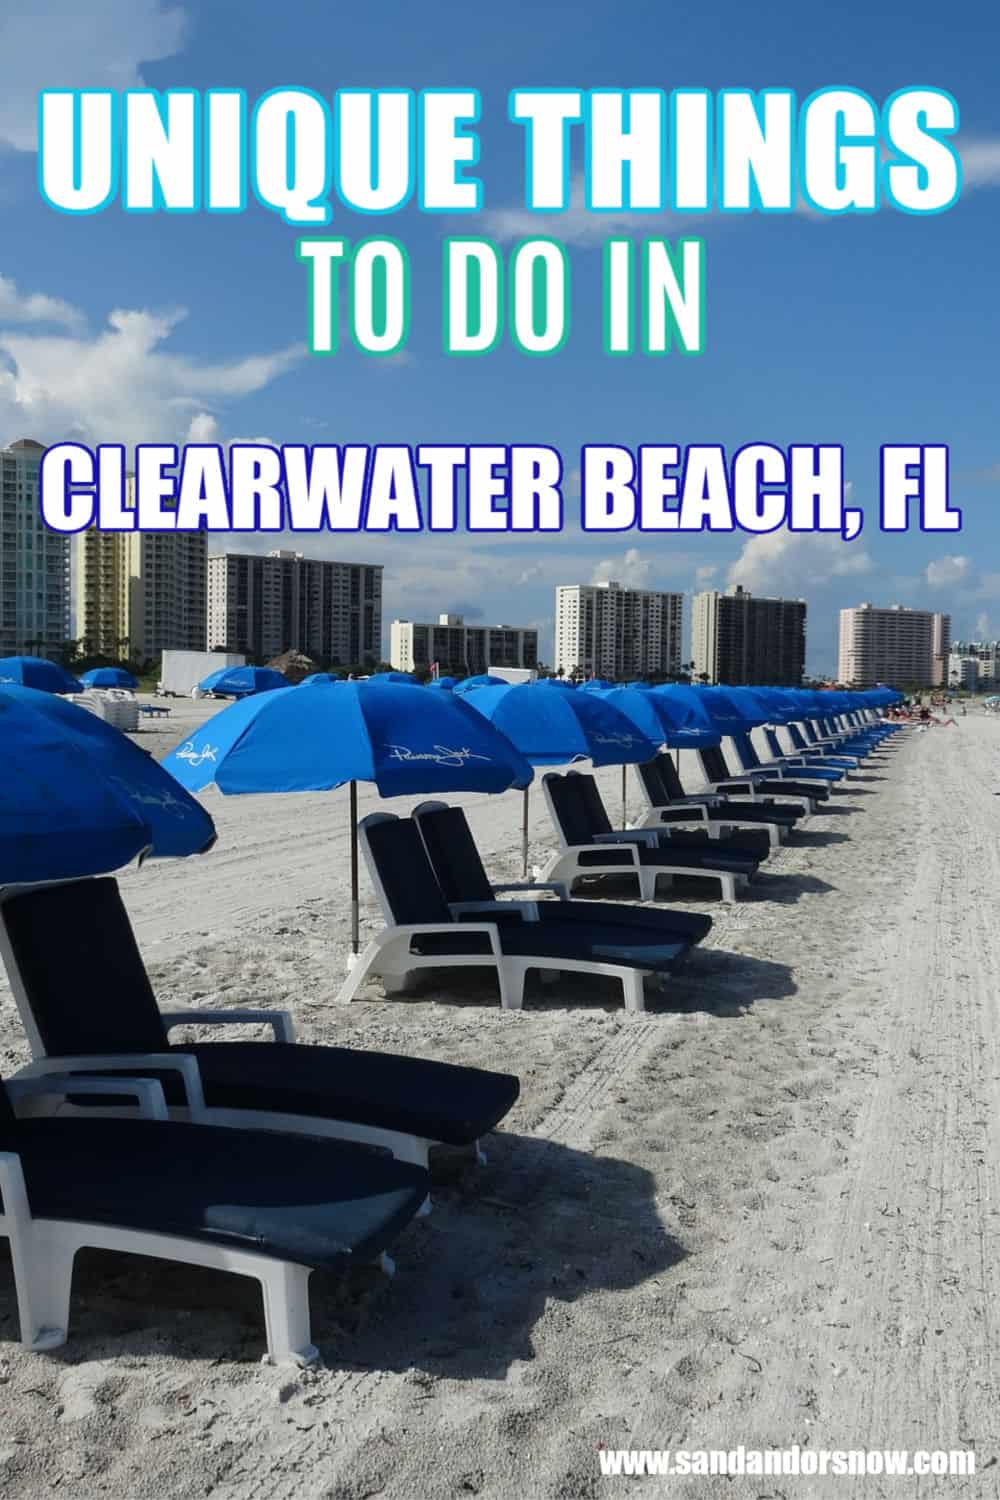 Headed to Clearwater Beach and looking for fun activities when you visit? From cheeky meals to free festivals, here are 8 unique things to do in Clearwater Beach, FL! #ClearWater #BestBeachTown #MyClearwater #BeachVacation #VisitFlorida